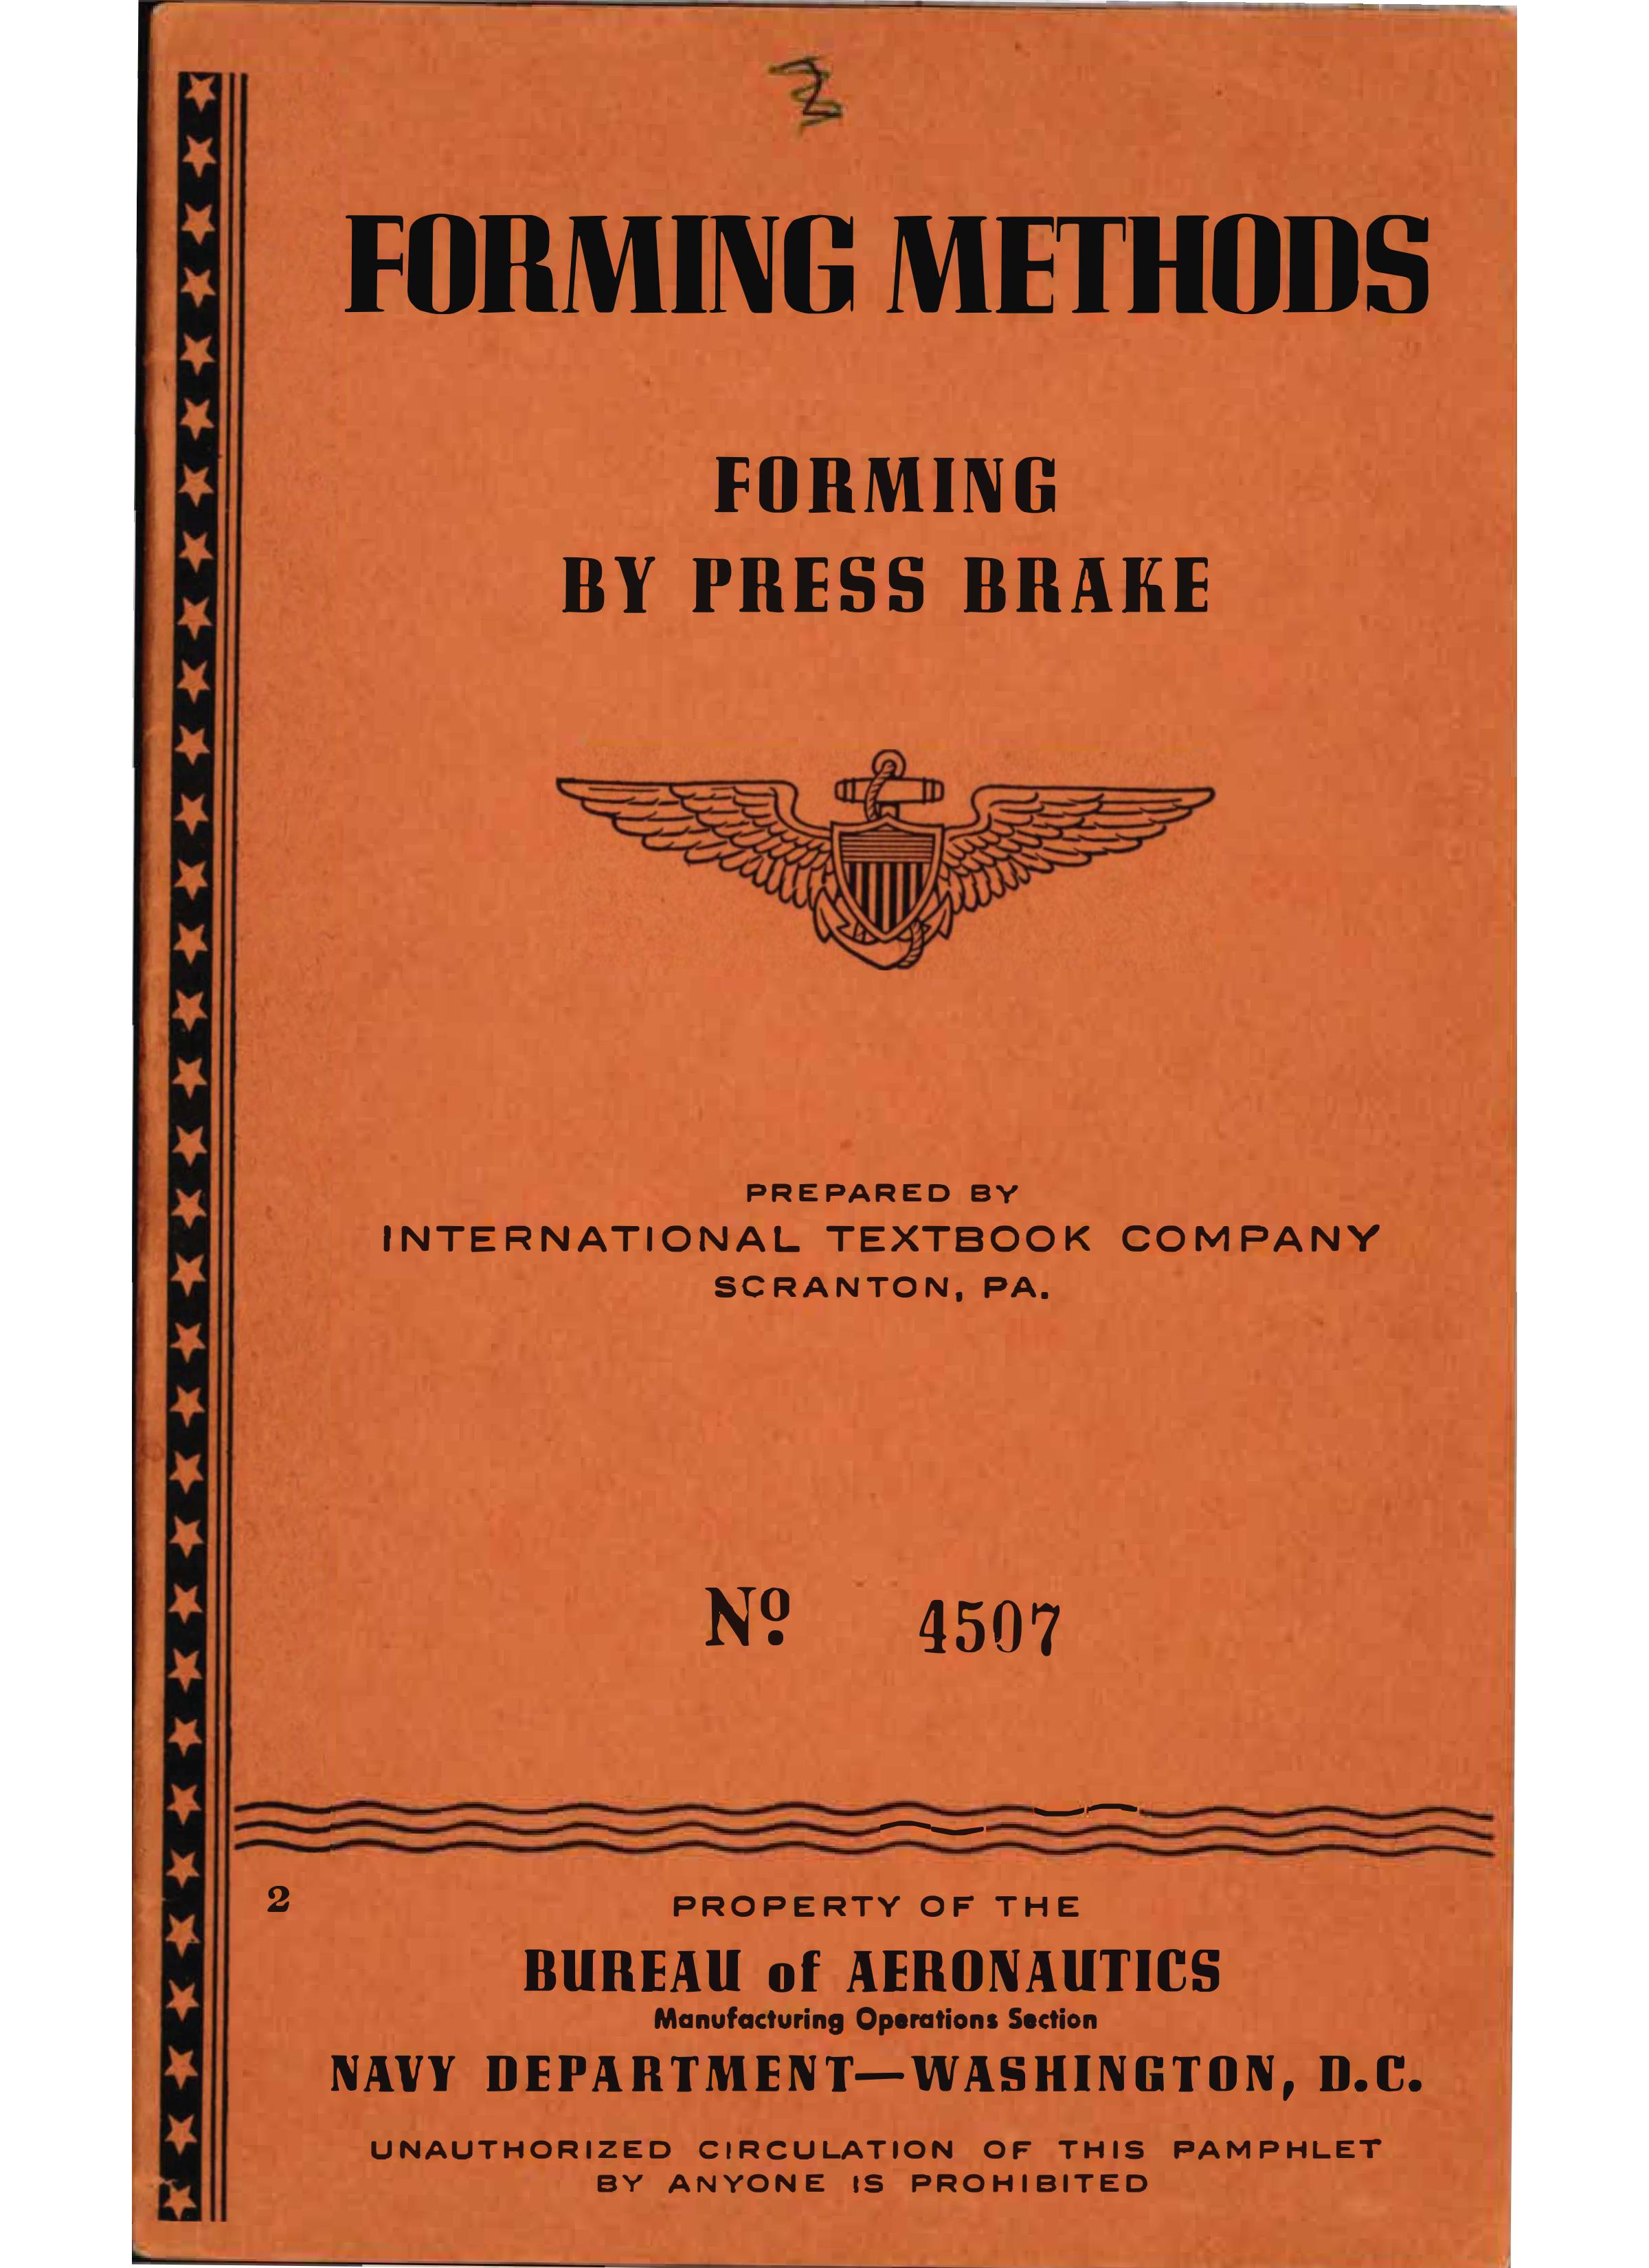 Sample page 1 from AirCorps Library document: Forming Methods - Press Brake - Bureau of Aeronautics